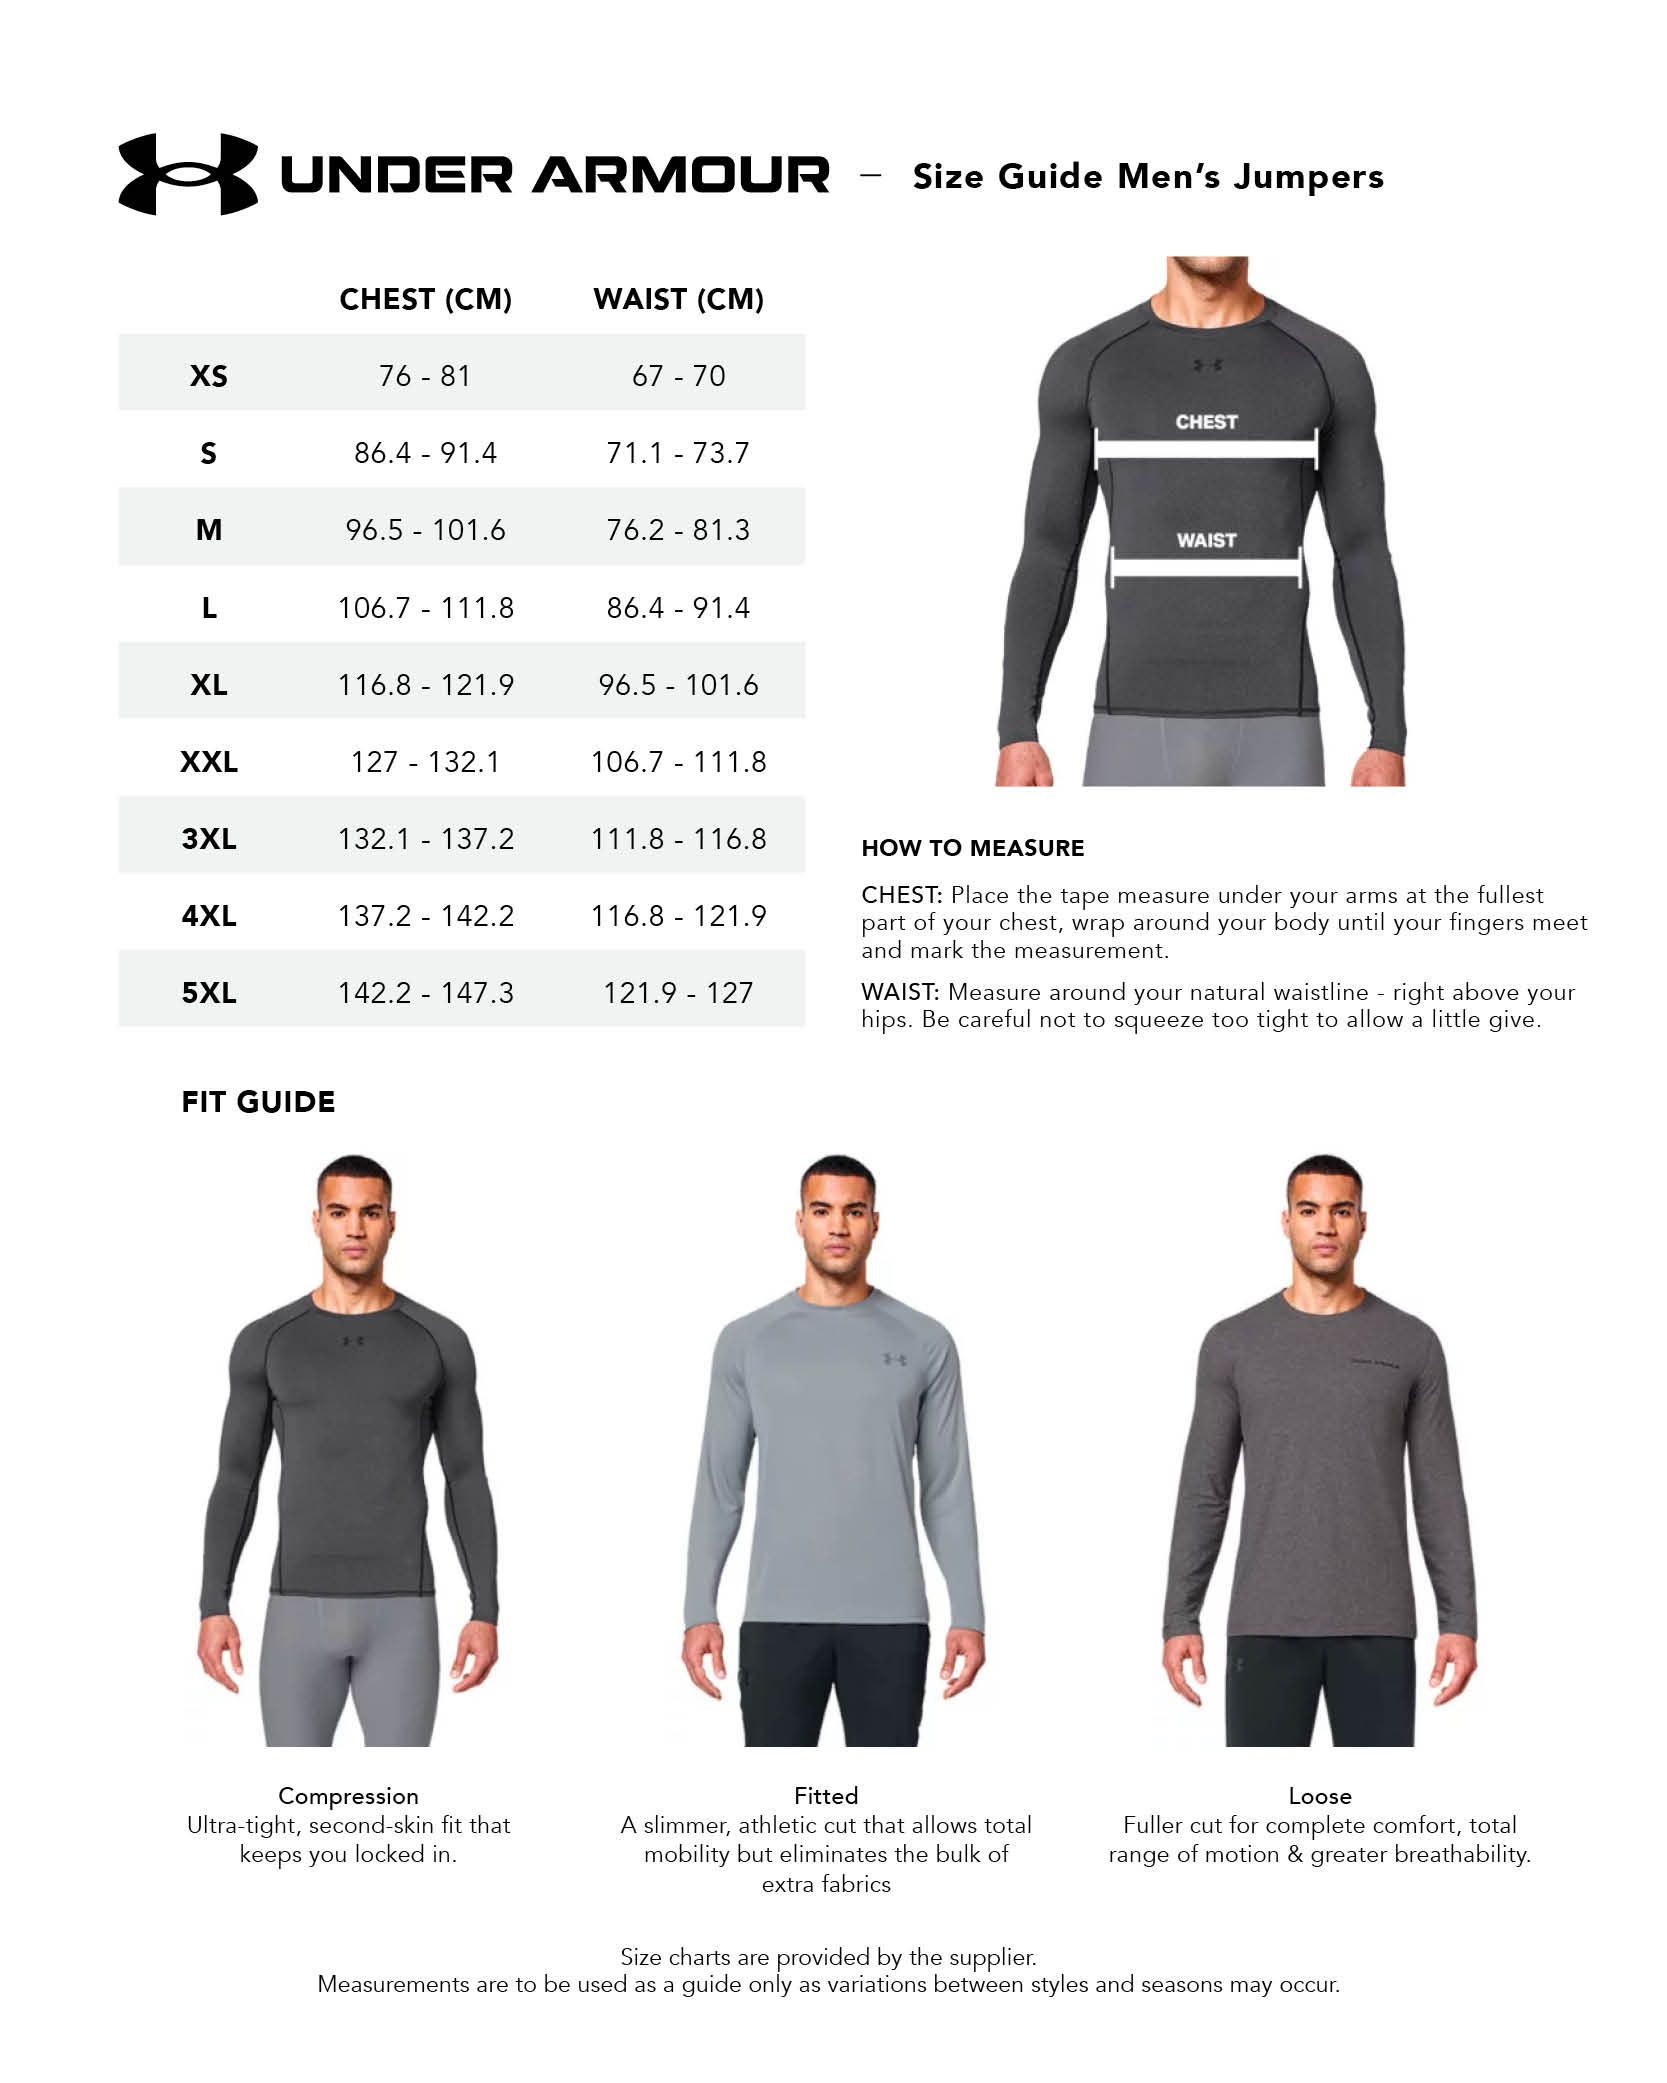 under armour-jumpers-mens size chart